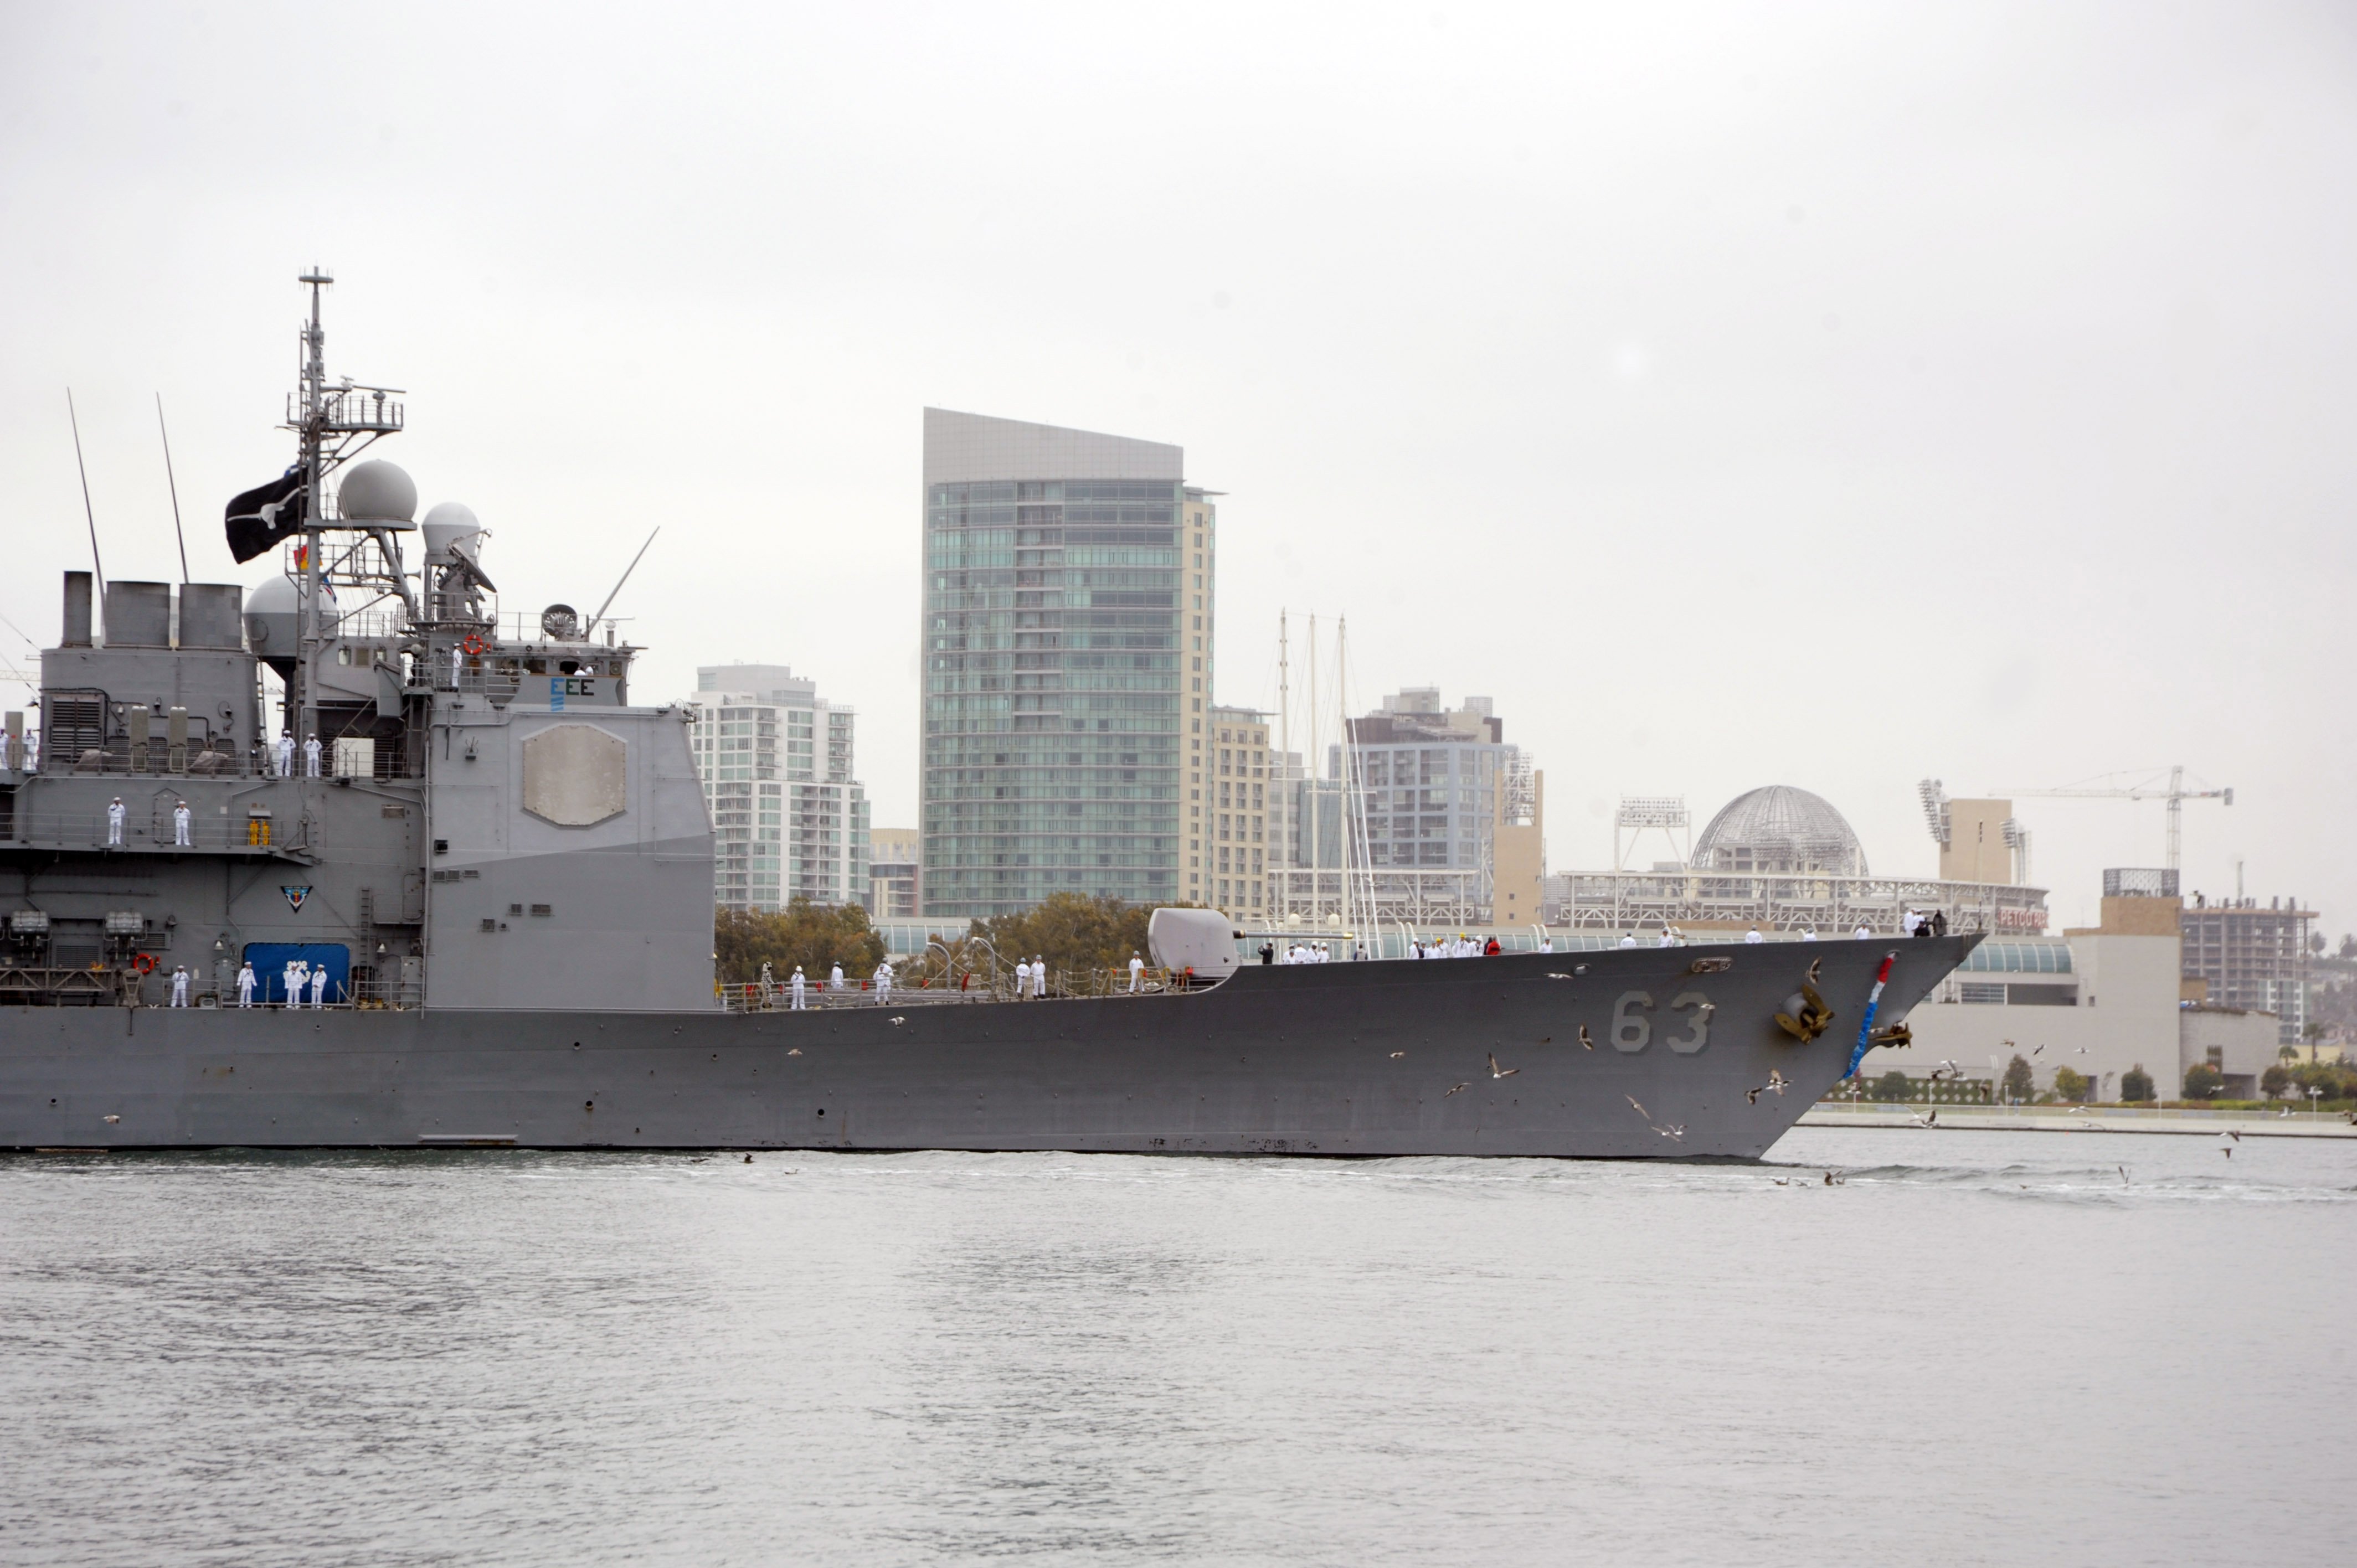 USS Cowpens (CG 63) returns to San Diego following a deployment to the western Pacific in 2014. US Navy Photo